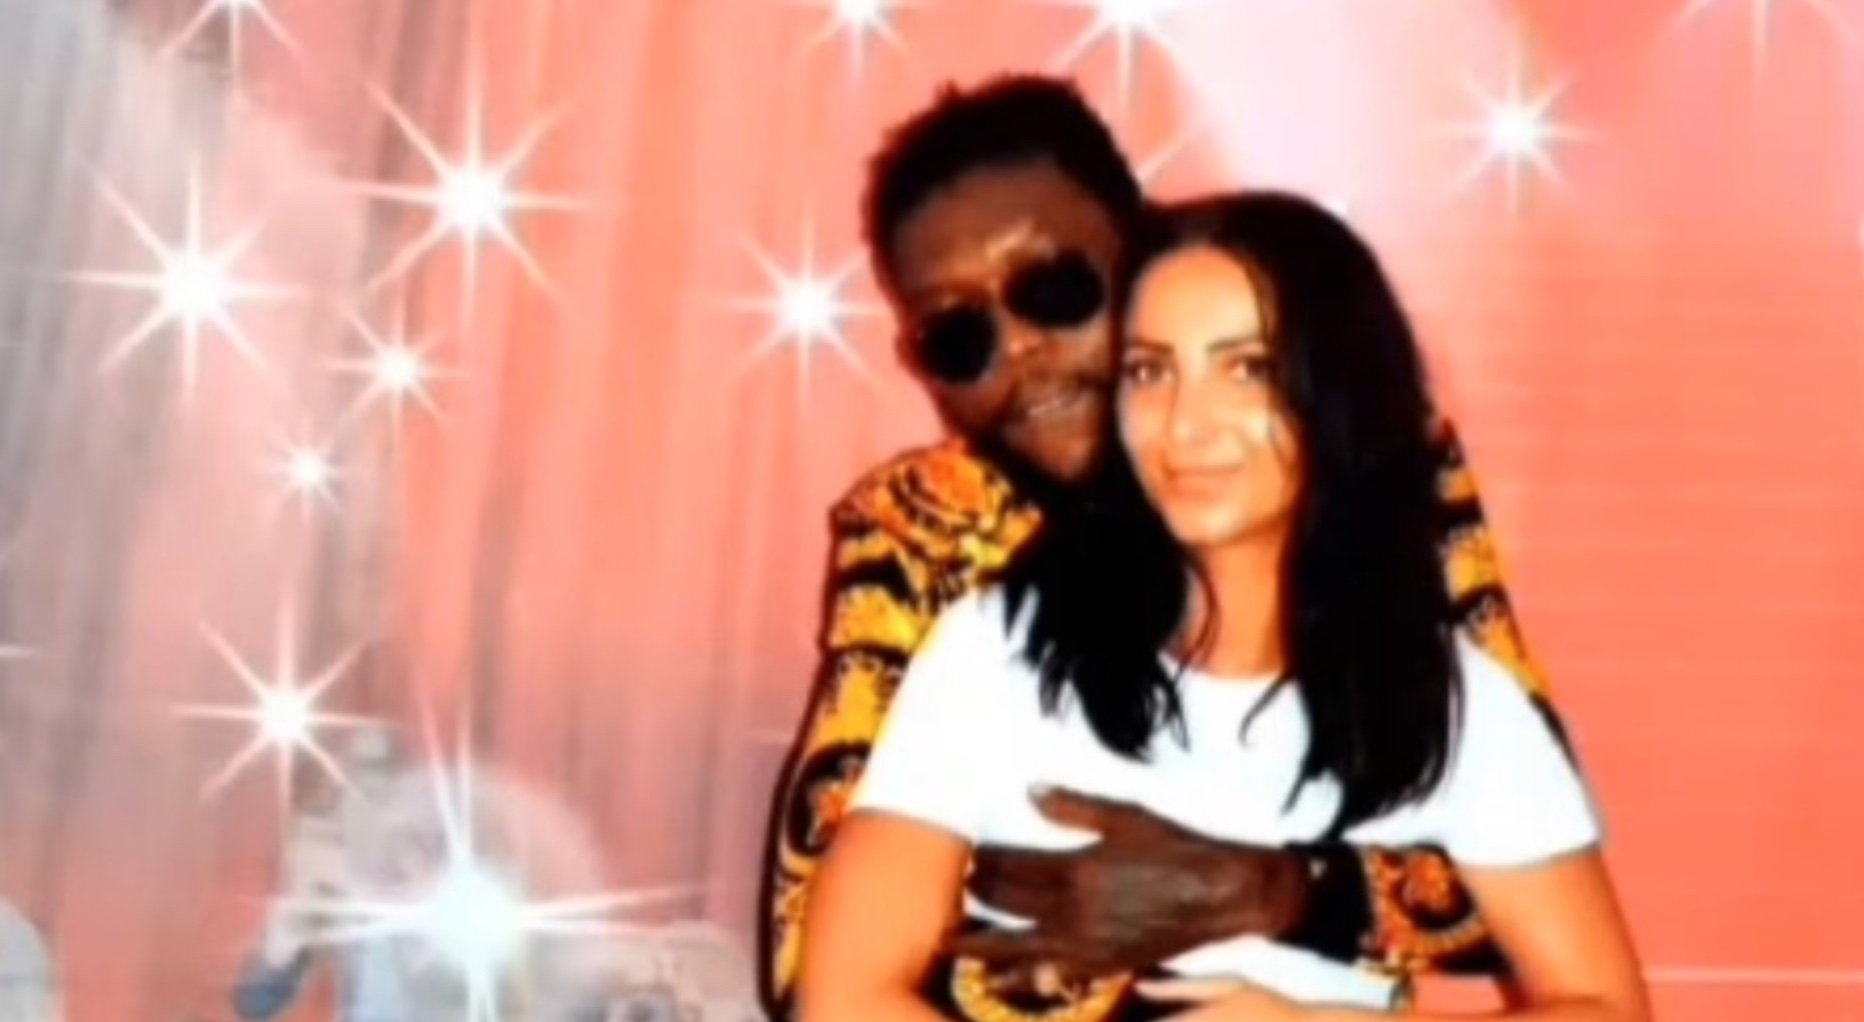 Vybz Kartel Celebrates 8 Year Anniversary With Fiancée 'Sidem Ozturk' With These Pictures - See Photos